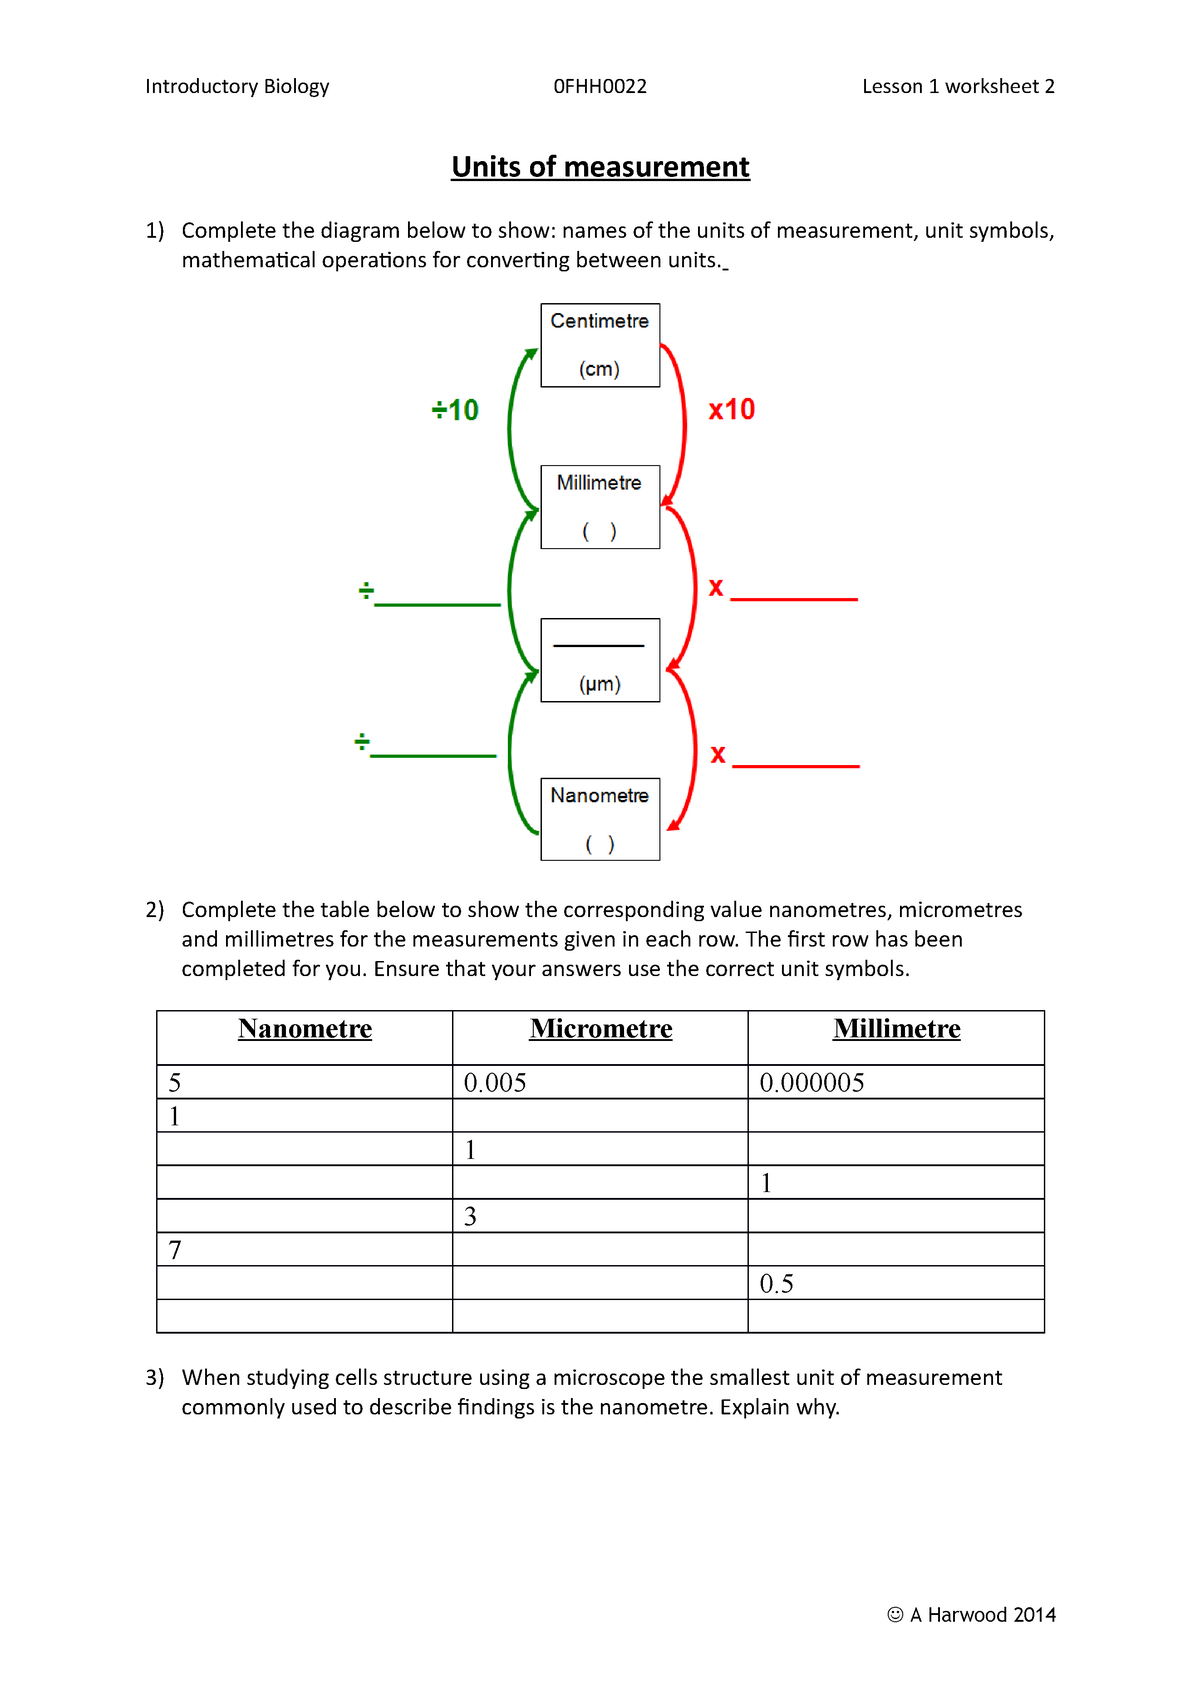 magnification-introductory-biology-0fhh0022-lesson-1-worksheet-2